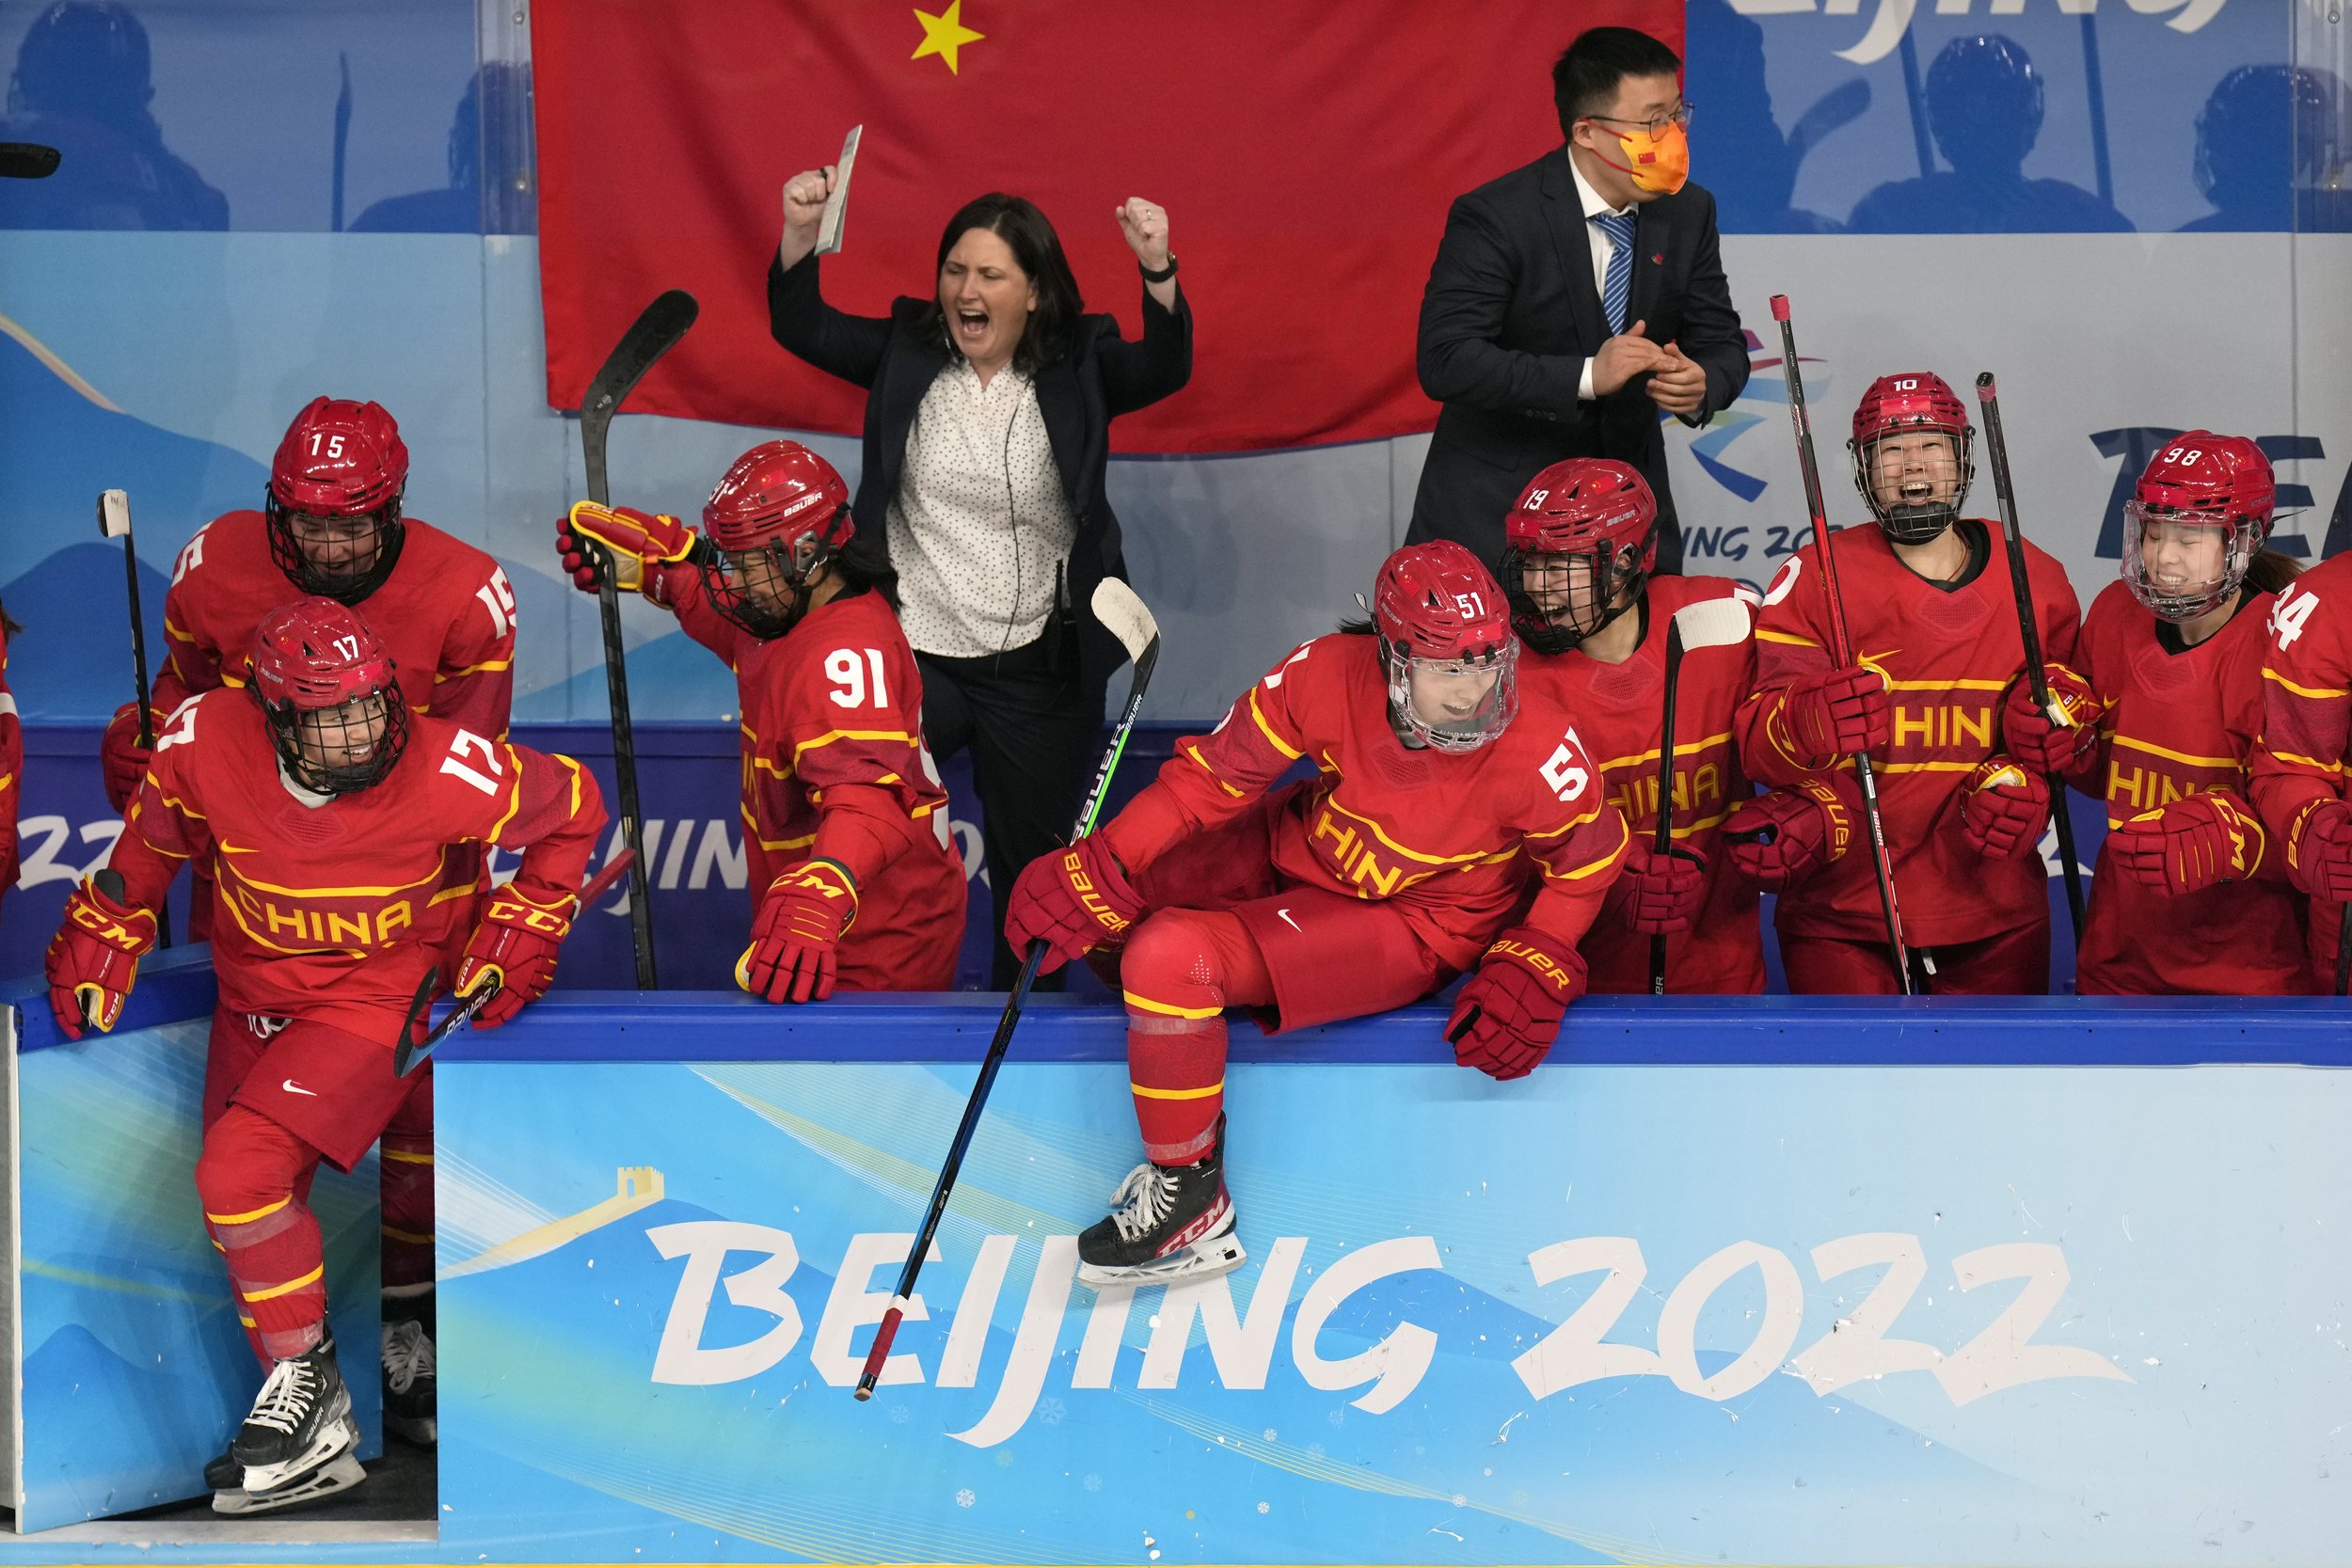  China players and coaches celebrate after beating Japan in a shoot-out during a preliminary round women's hockey game at the 2022 Winter Olympics, Sunday, Feb. 6, 2022, in Beijing. (AP Photo/Petr David Josek) 